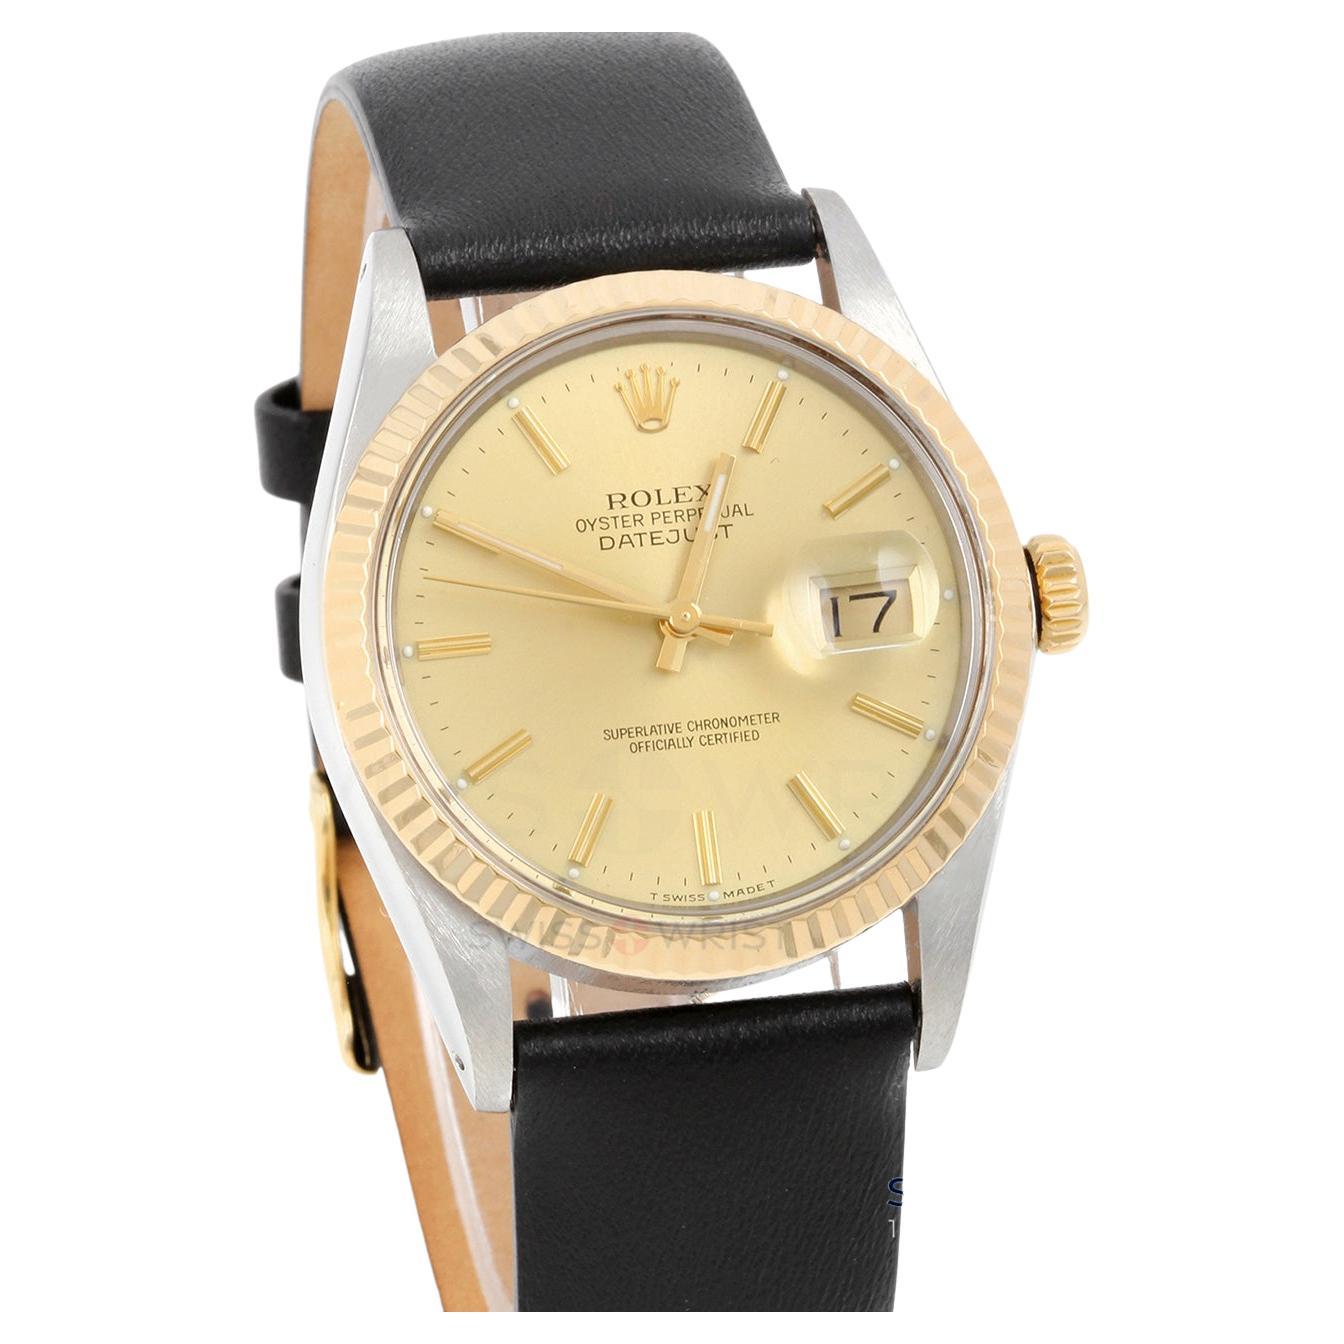 Rolex Mens 36mm TT Datejust Champagne Dial Black Leather Strap Watch Ref#16013 For Sale